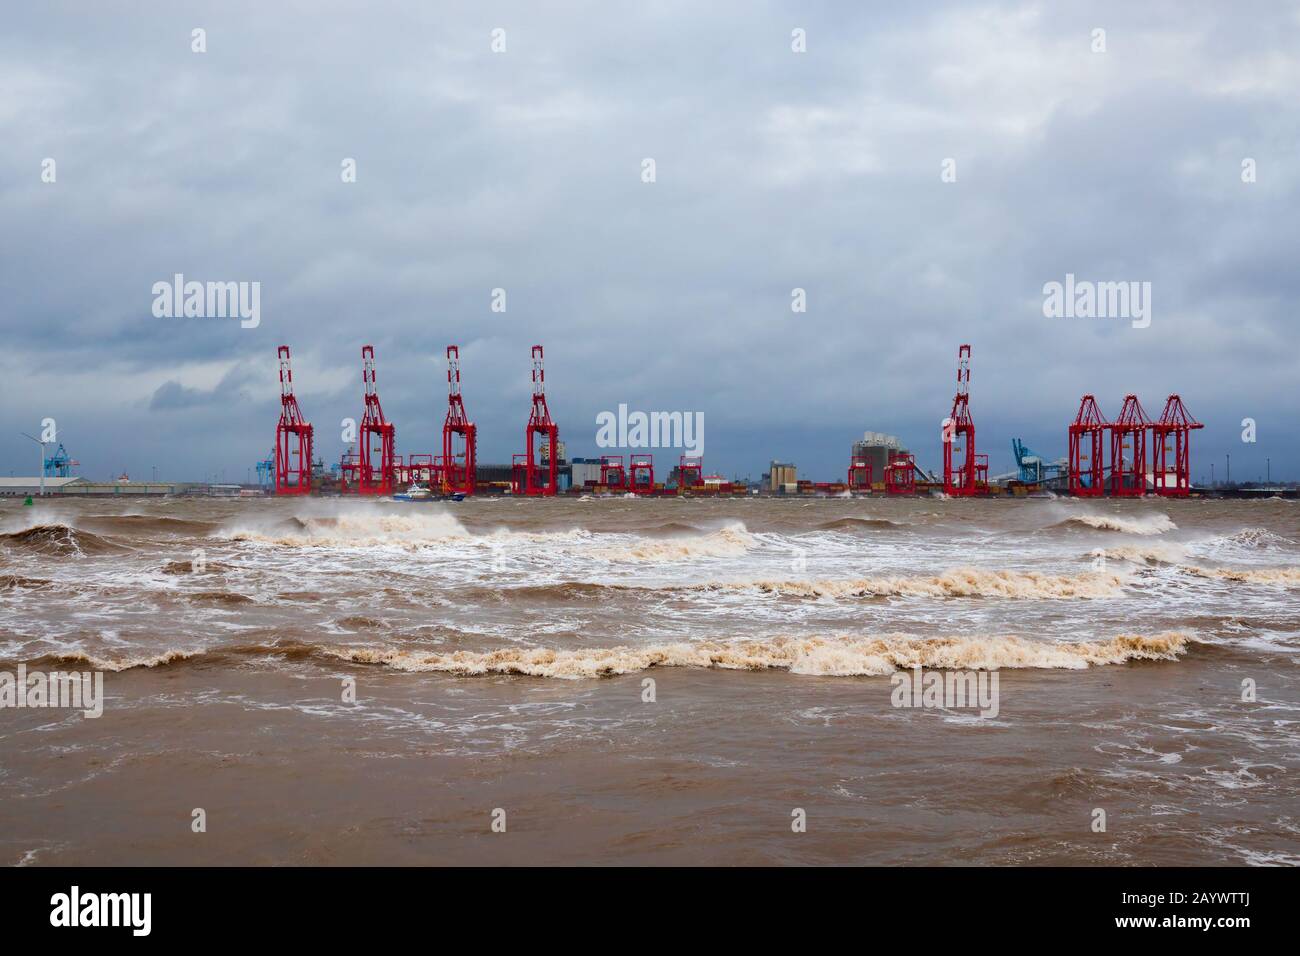 Looking across the river towards the cranes at Liverpool 2 from New Brighton Merseyside during the recent Storm Ciara. Stock Photo